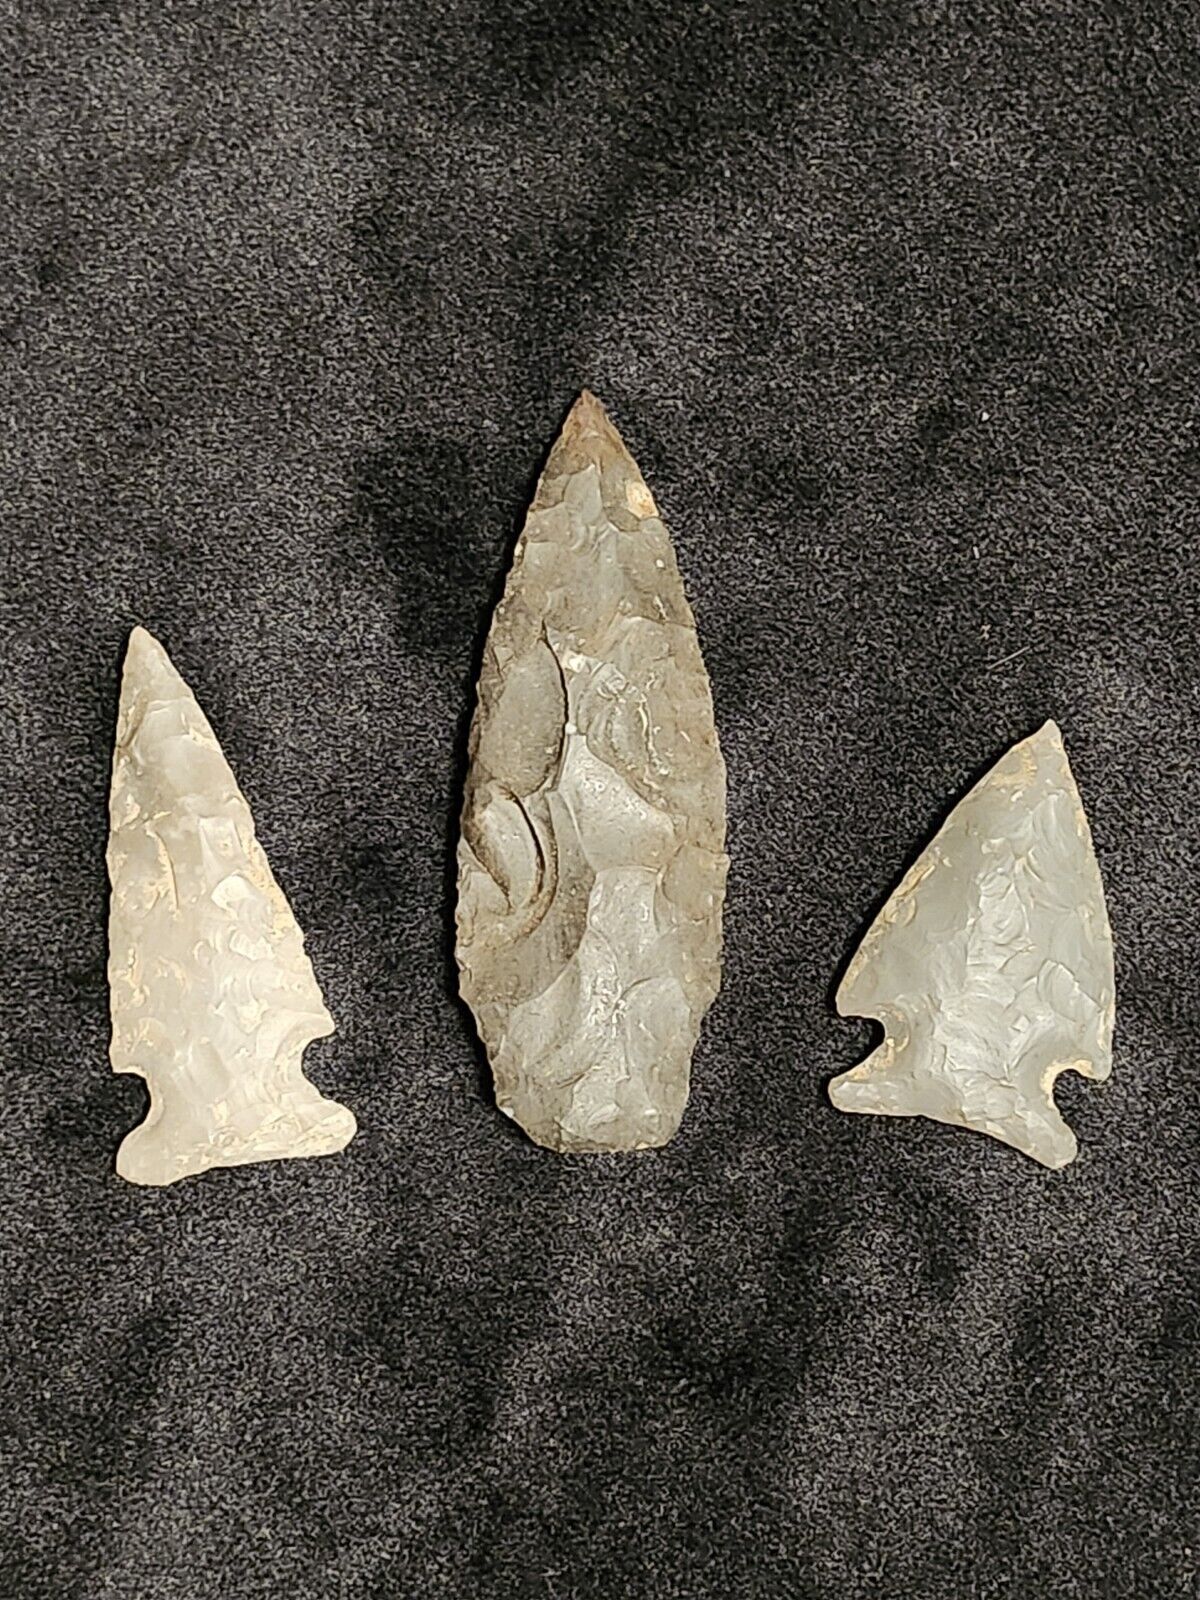 Authentic Arrowheads 3 Native American Artifacts Lot Group